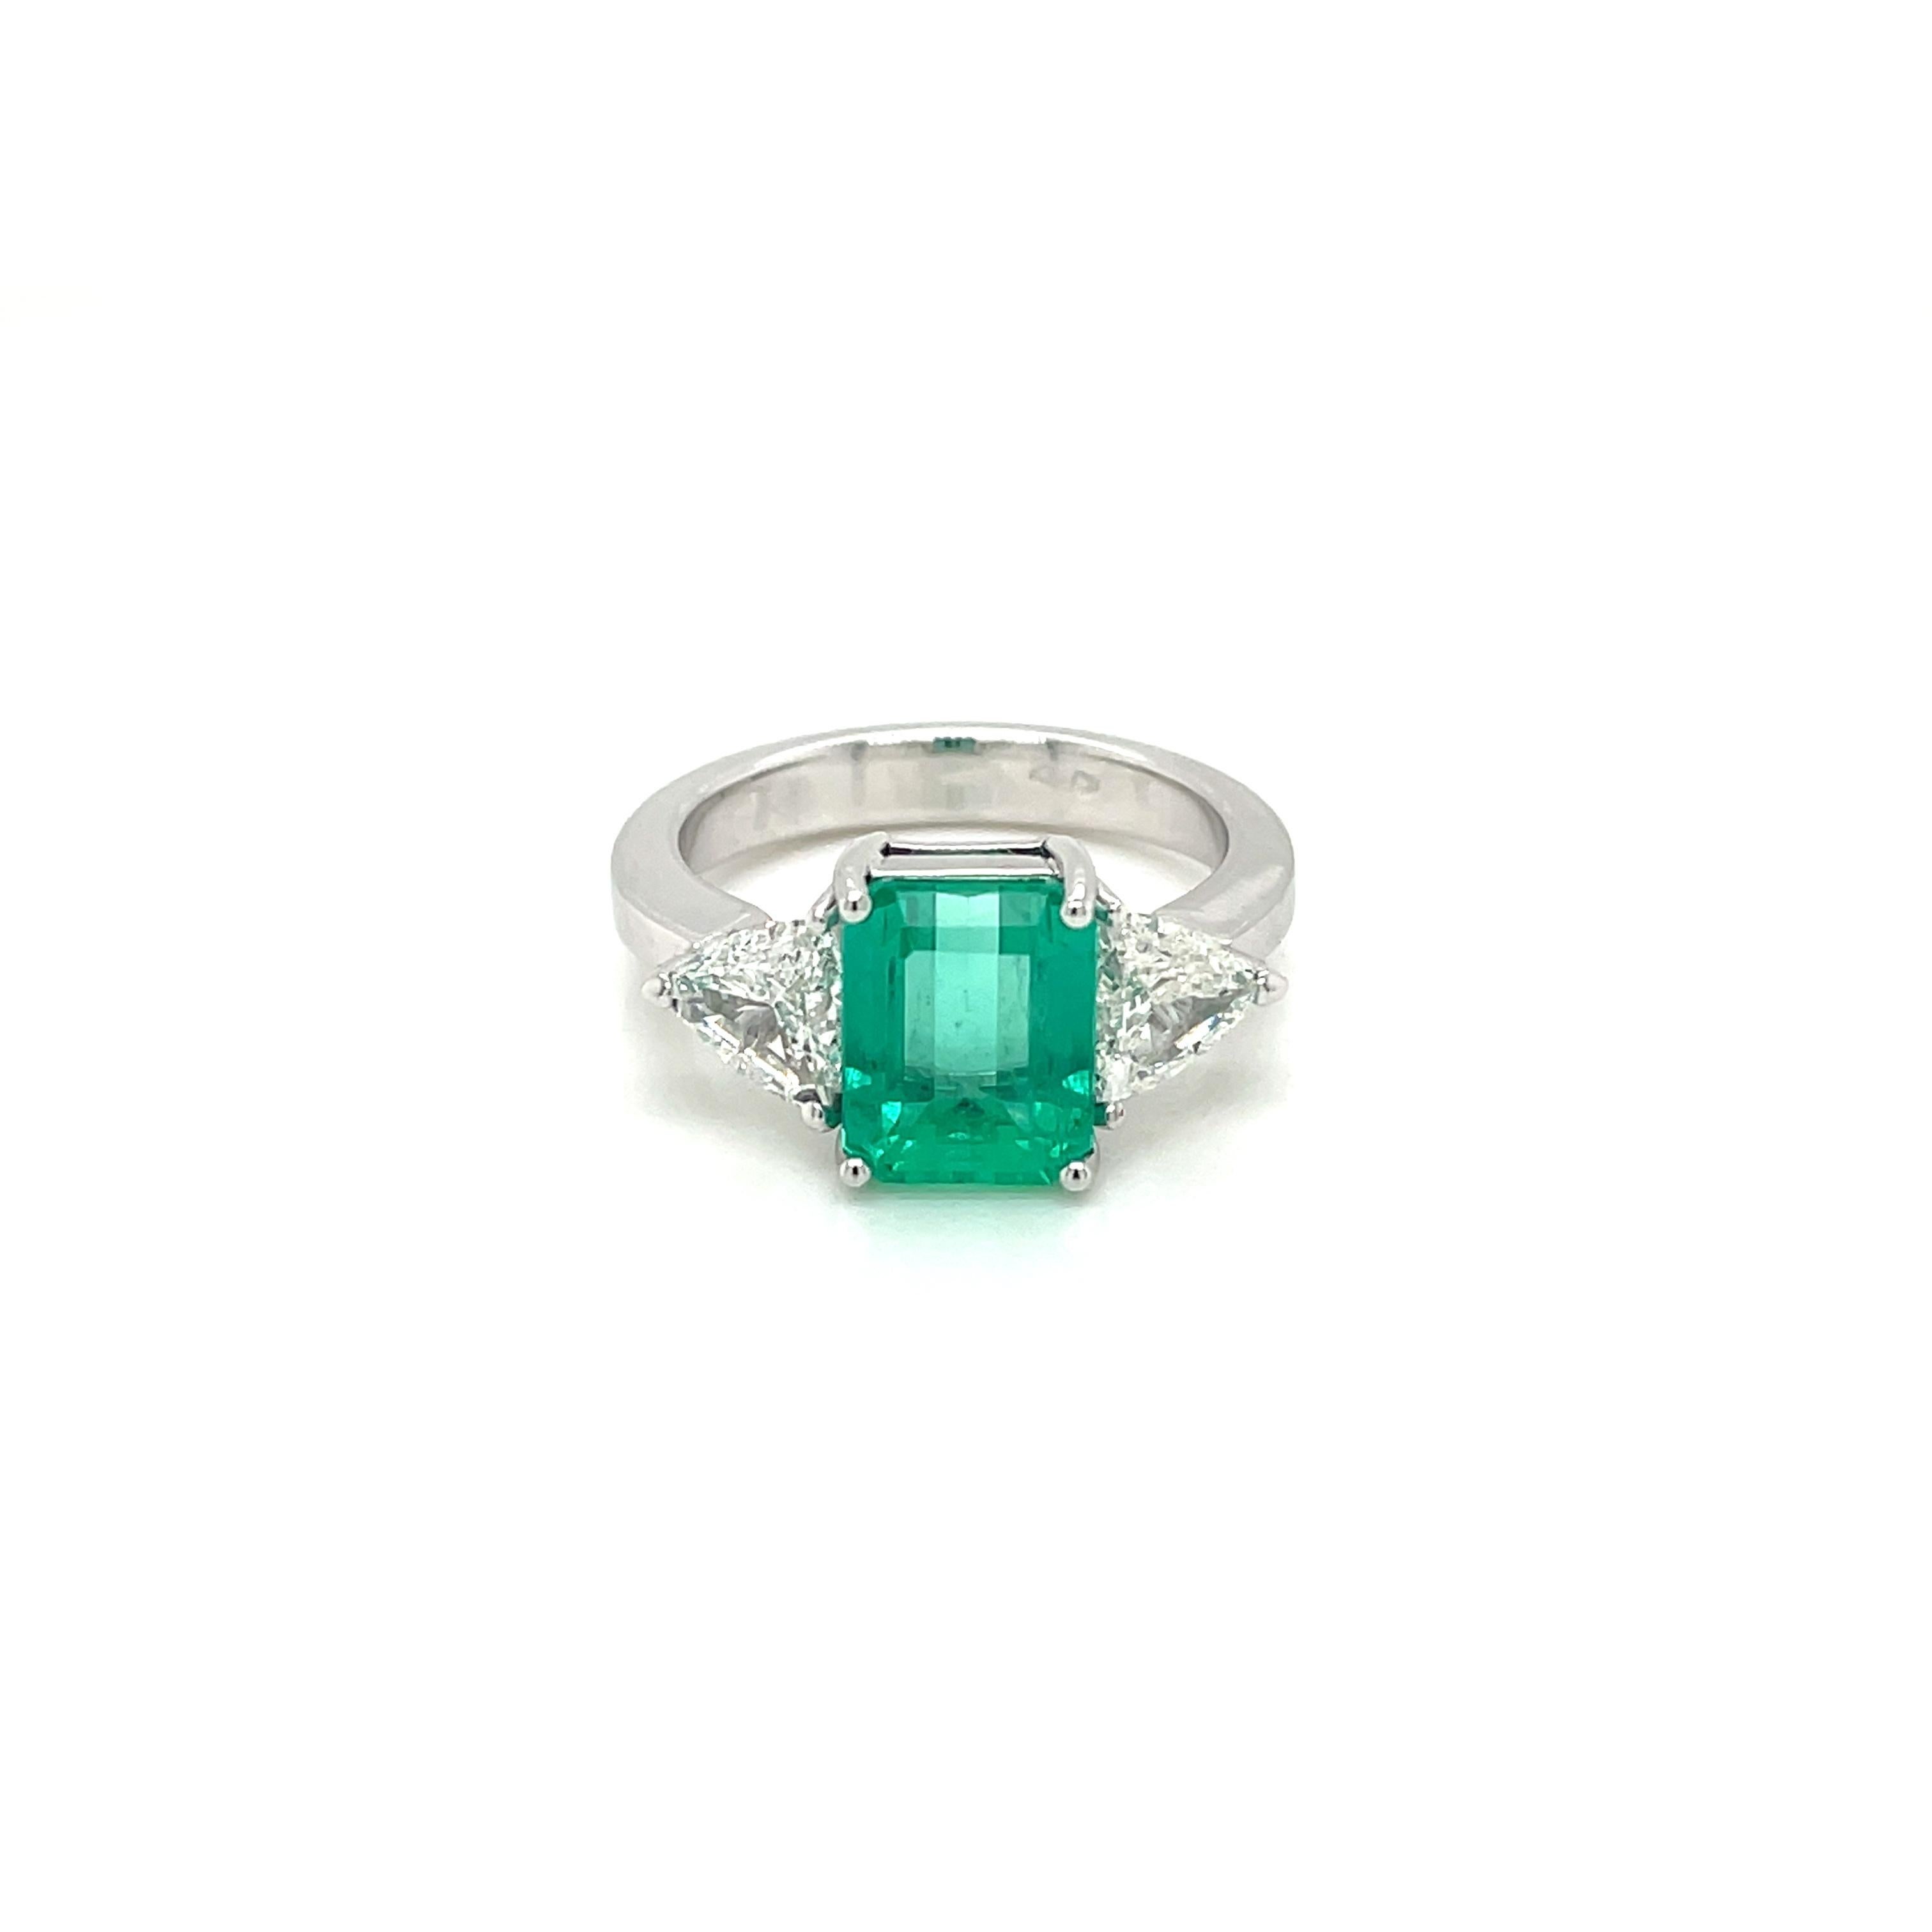 An exquisite ring set in 18k white gold, contemporary, featuring a vivid green 2.93 ct Emerald-cut Colombian Emerald, surrounded by 2 Diamonds triangle cut, 0,50 ct each for a total weight of 1 carat, graded G/H color Vvs1 , graded G color Vvs1